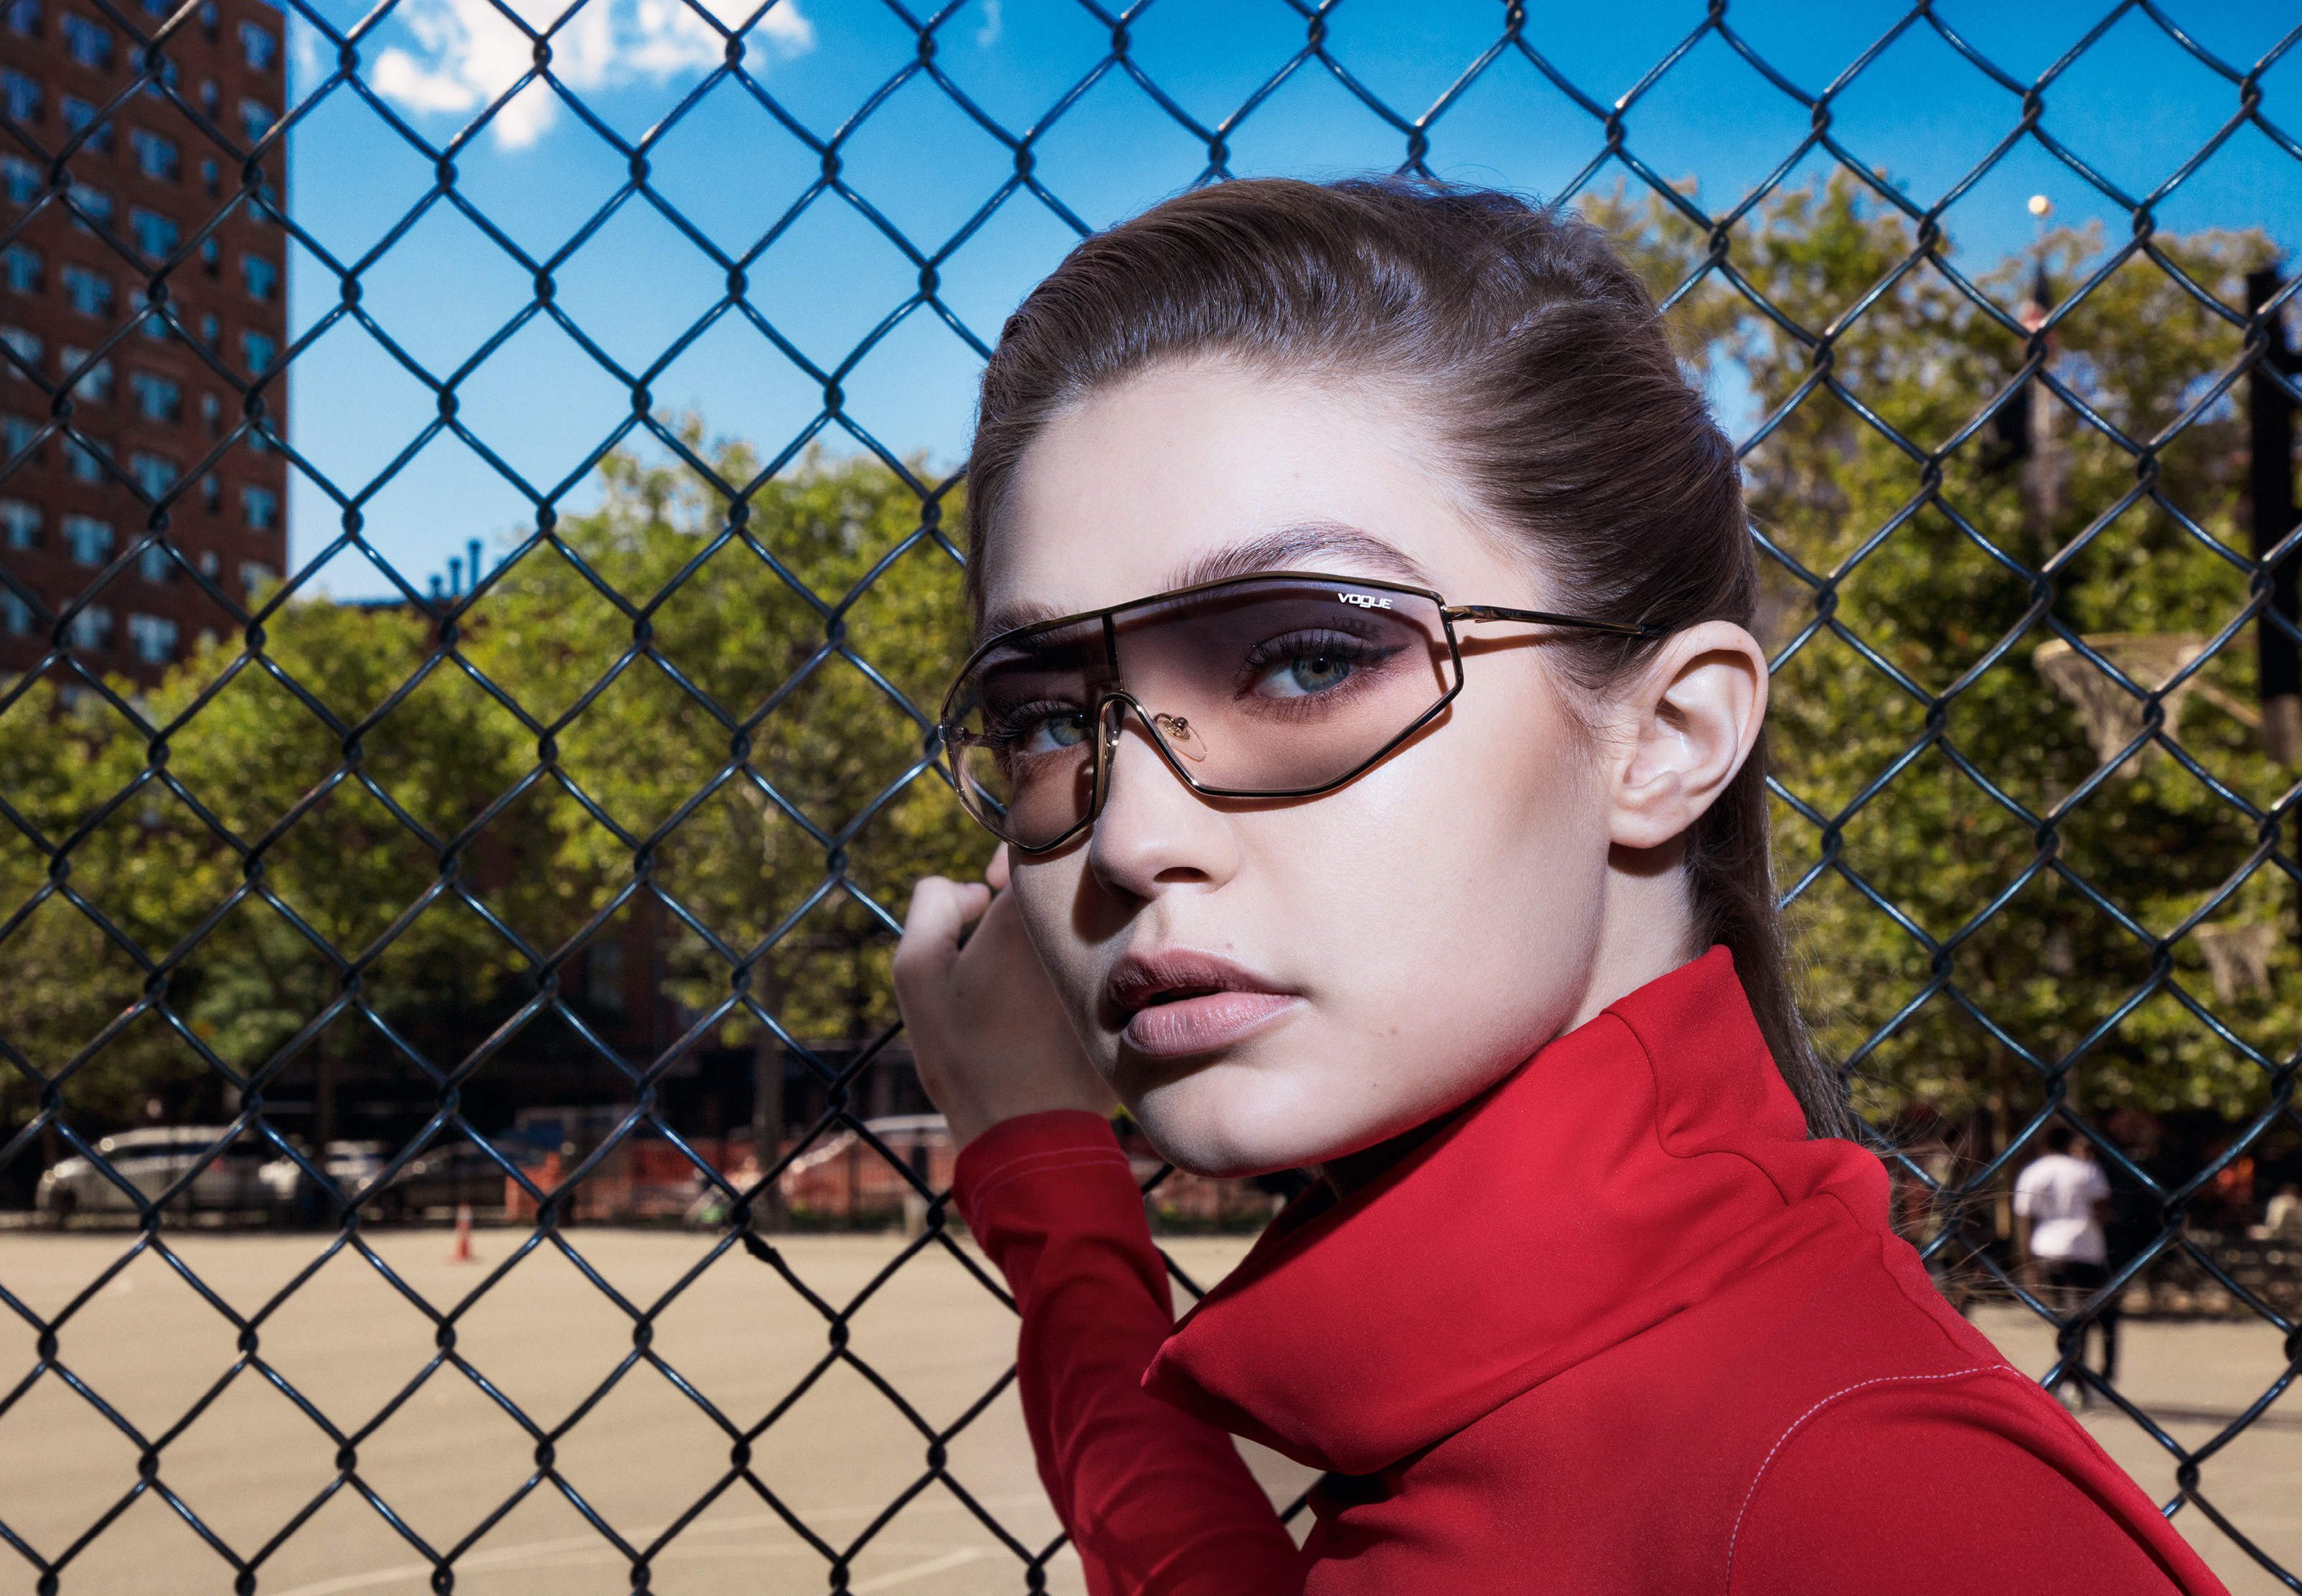 Free photo Gigi Hadid in sunglasses by the fence